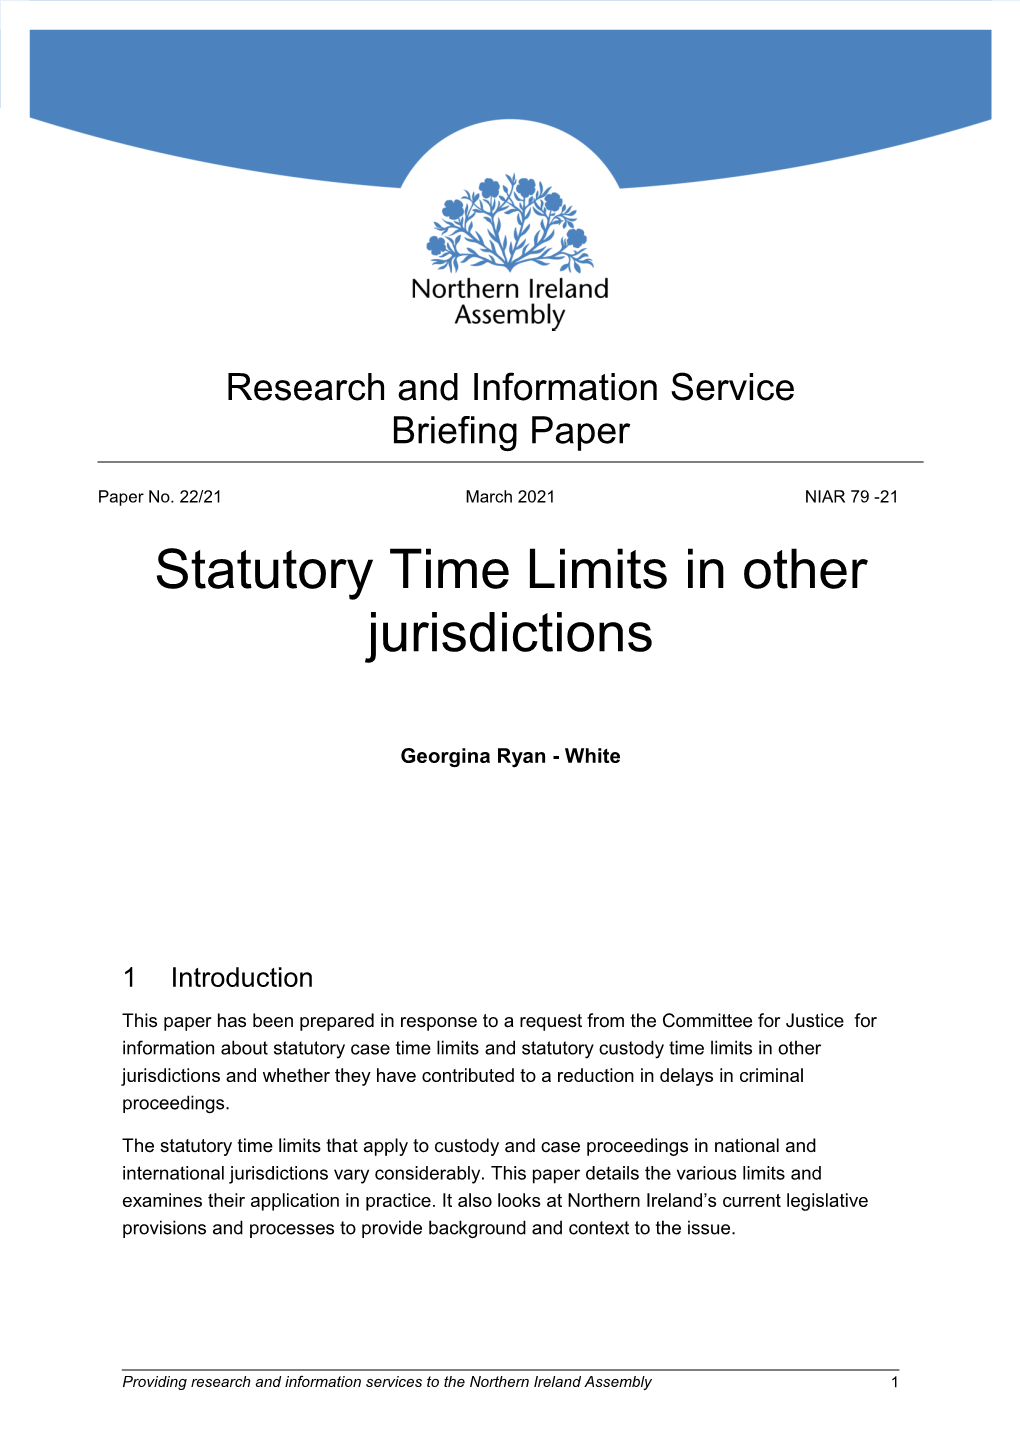 Statutory Time Limits in Other Jurisdictions